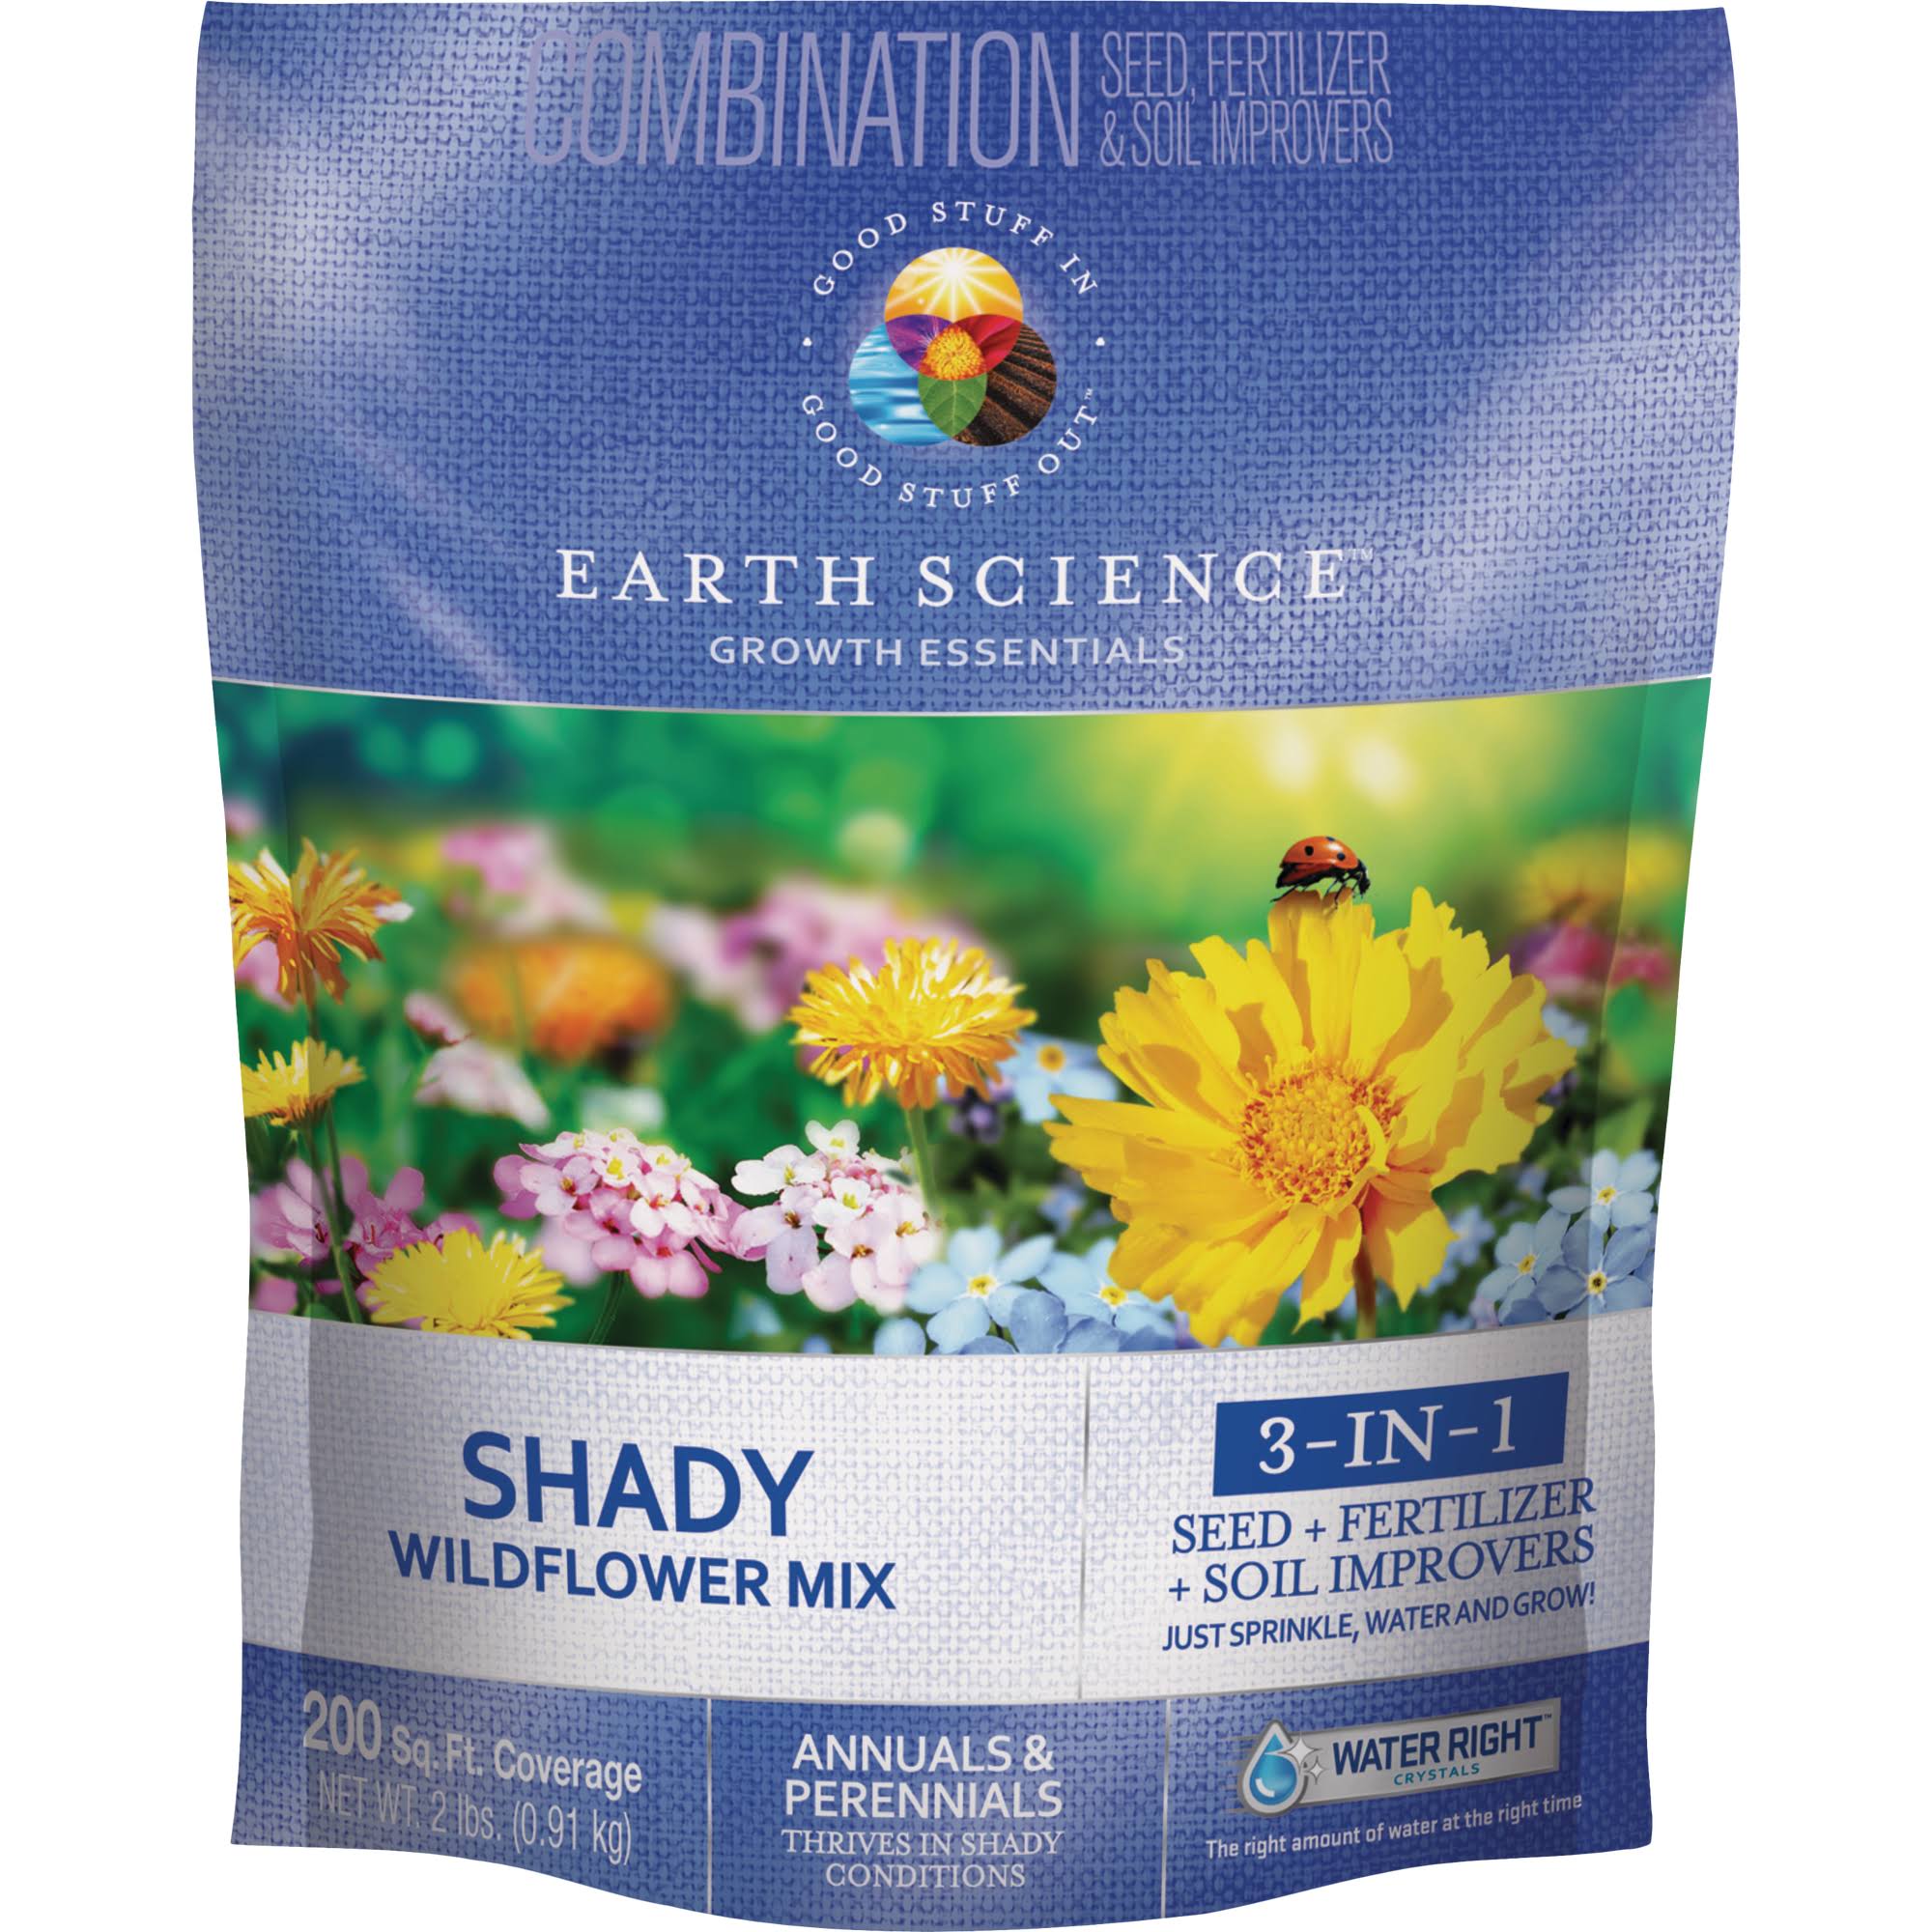 Earth Science All-in-One 2 lb. 200 Sq. ft. Coverage Shady Wildflower Seed Mix 12140-6